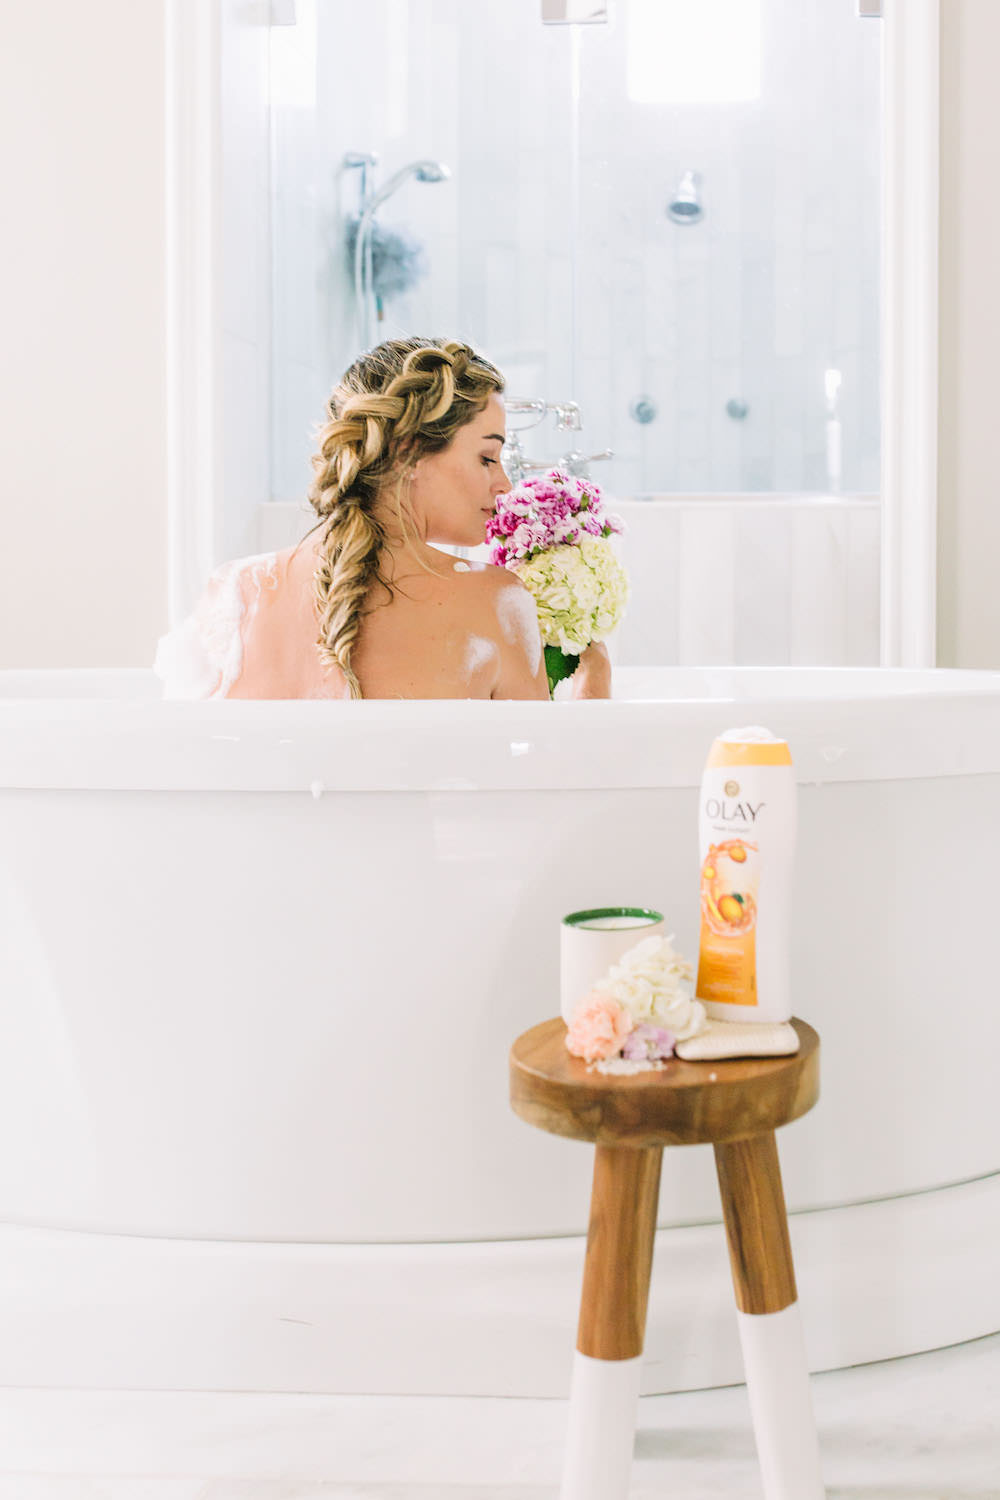 Caitlin Lindquist of the Arizona beauty blog Dash of Darling shares three steps to smooth summer skin while taking a relaxing bath with petals.